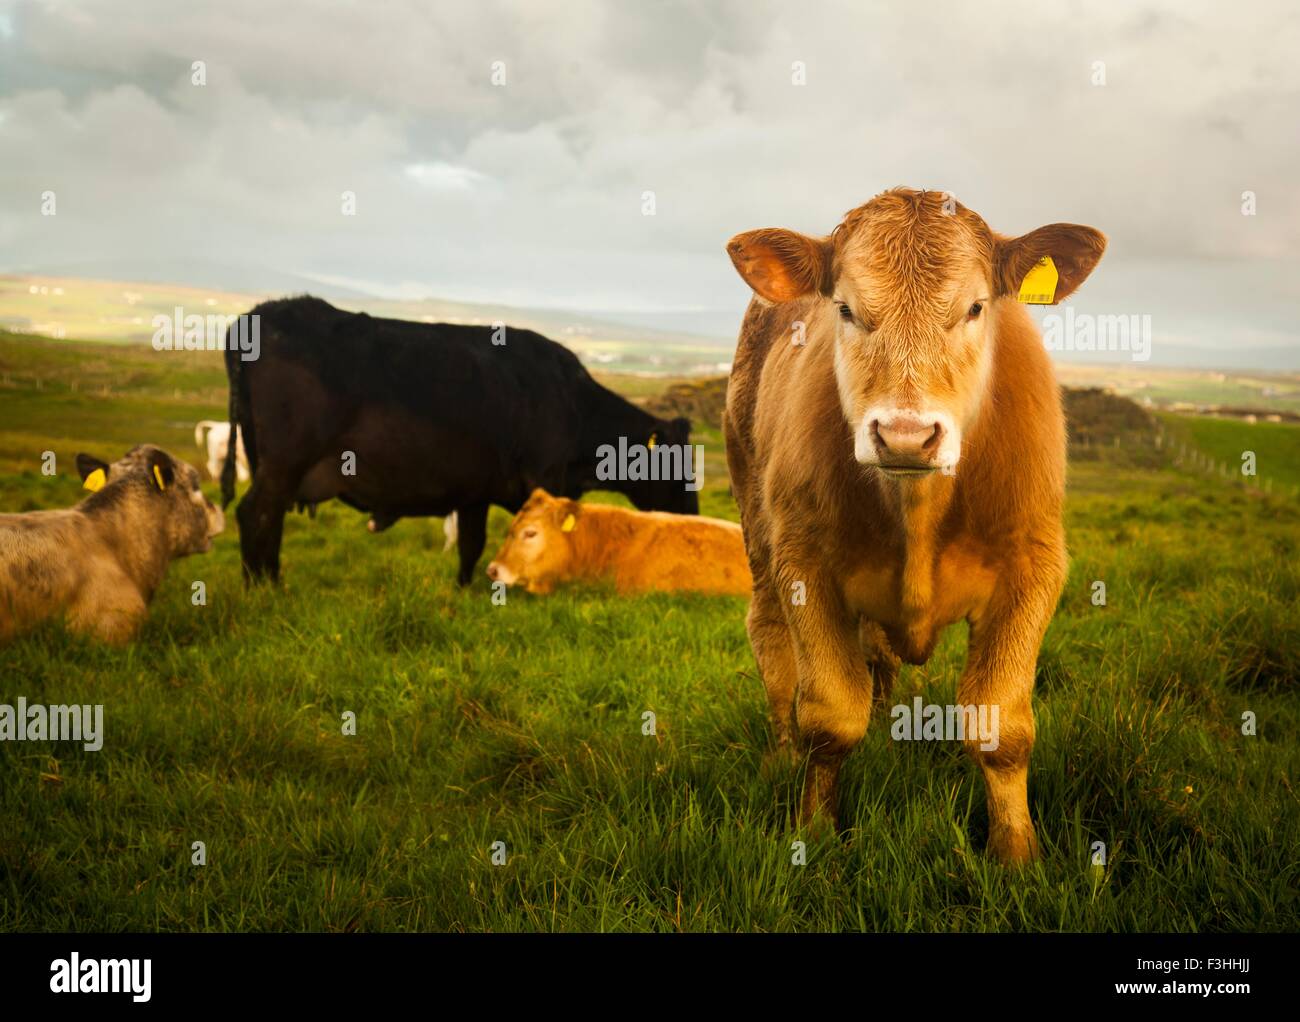 Cows in field, Giants Causeway, Bushmills, County Antrim, Northern Ireland, elevated view Stock Photo